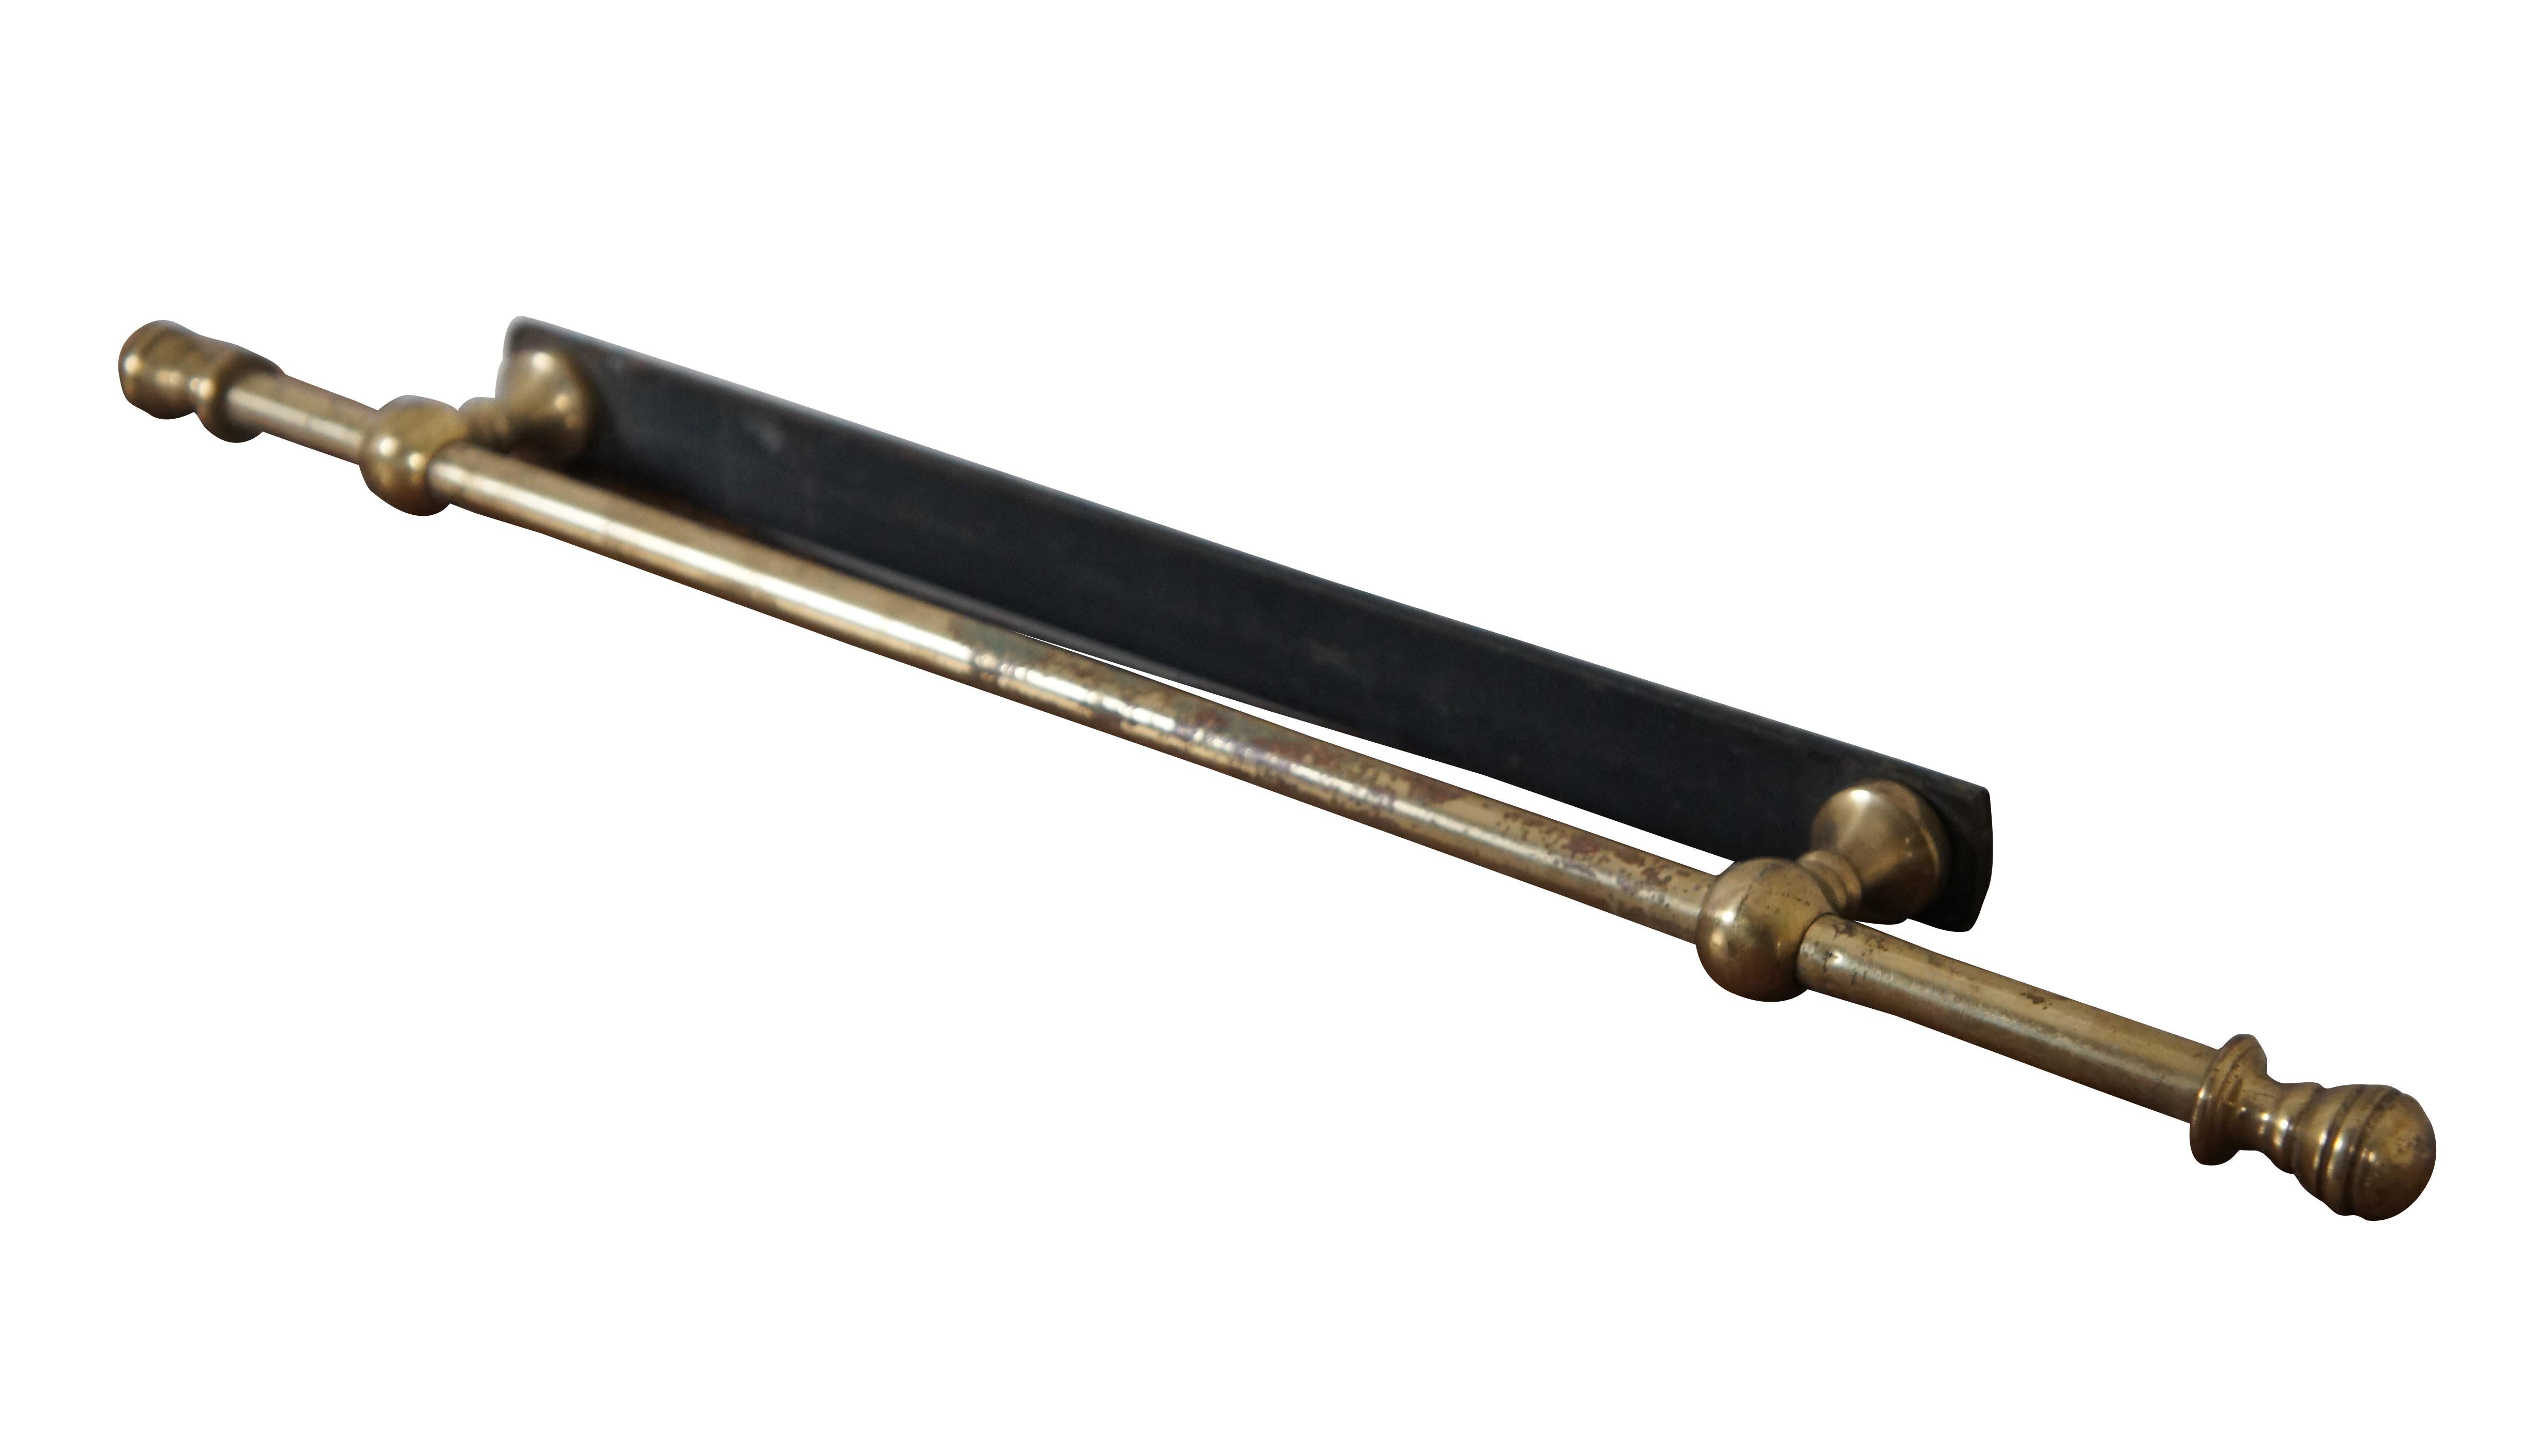 Antique brass towel bar / rack / holder featuring round turned finials and iron support.

Dimensions:
18.25